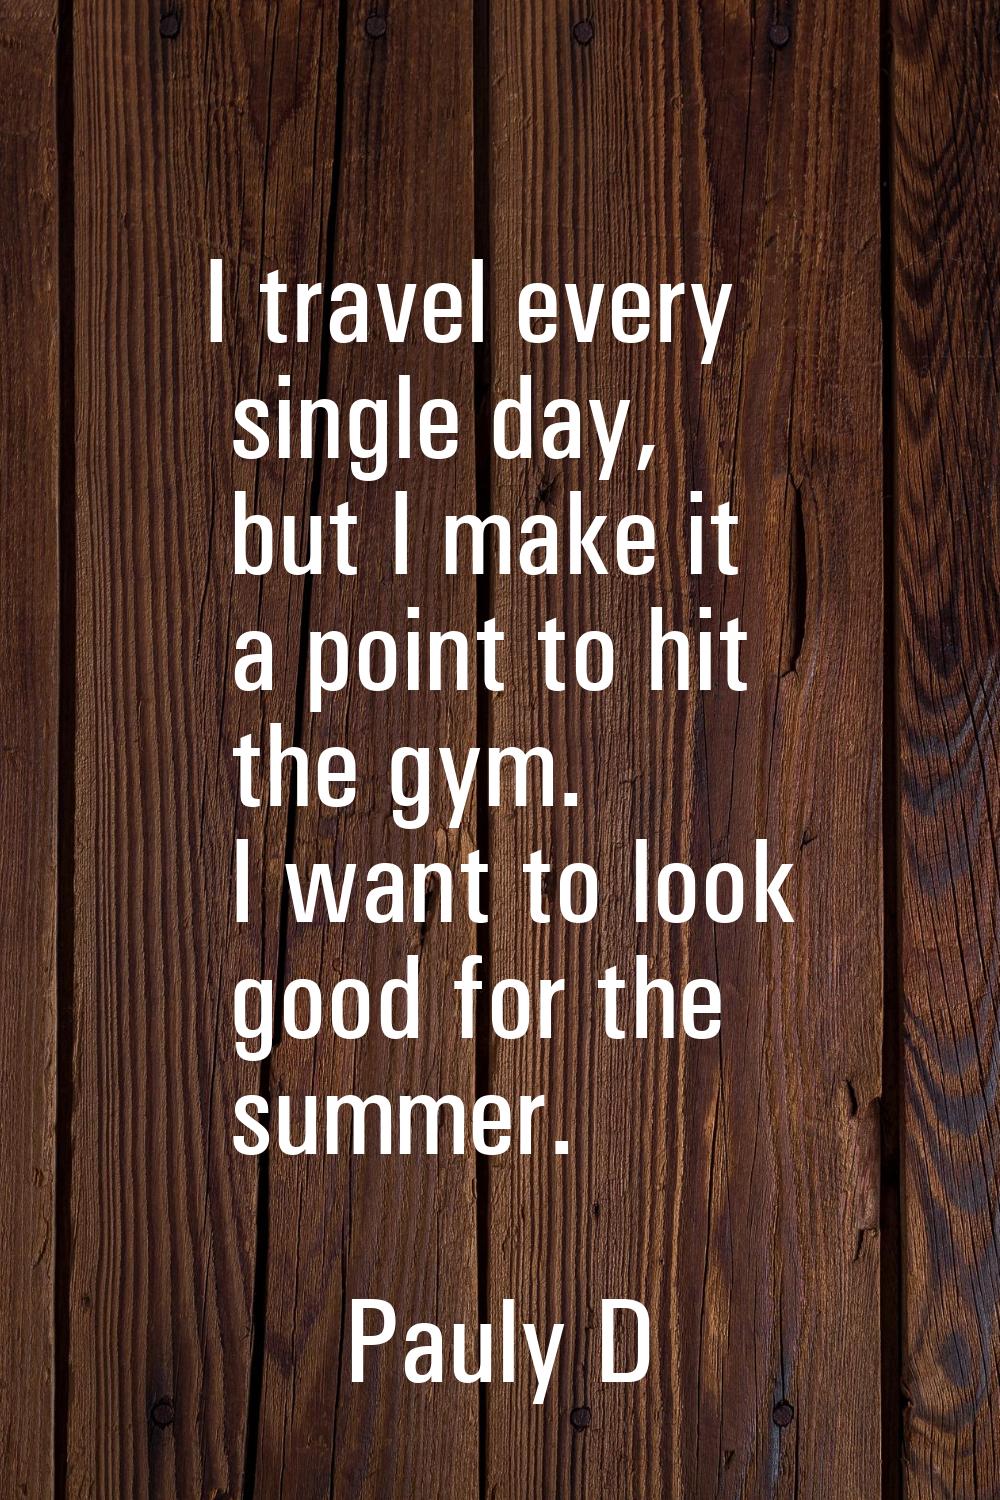 I travel every single day, but I make it a point to hit the gym. I want to look good for the summer